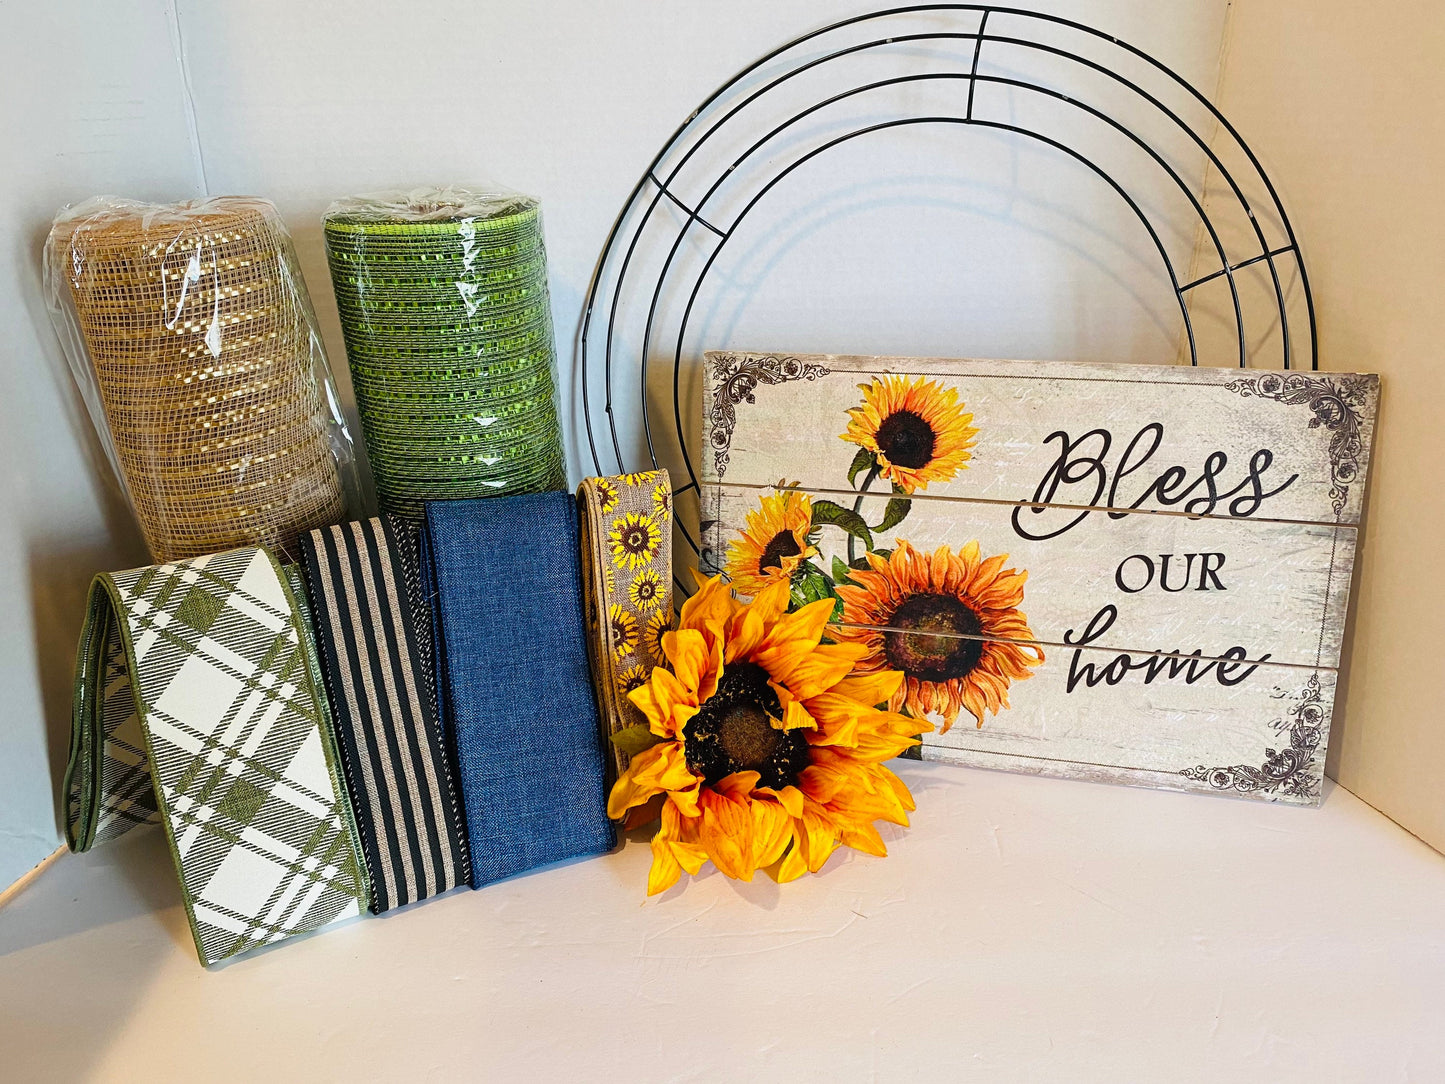 Bless Our Home Sunflower DIY Wreath Kit, Fall Everyday Welcome DIY Wreath Kit